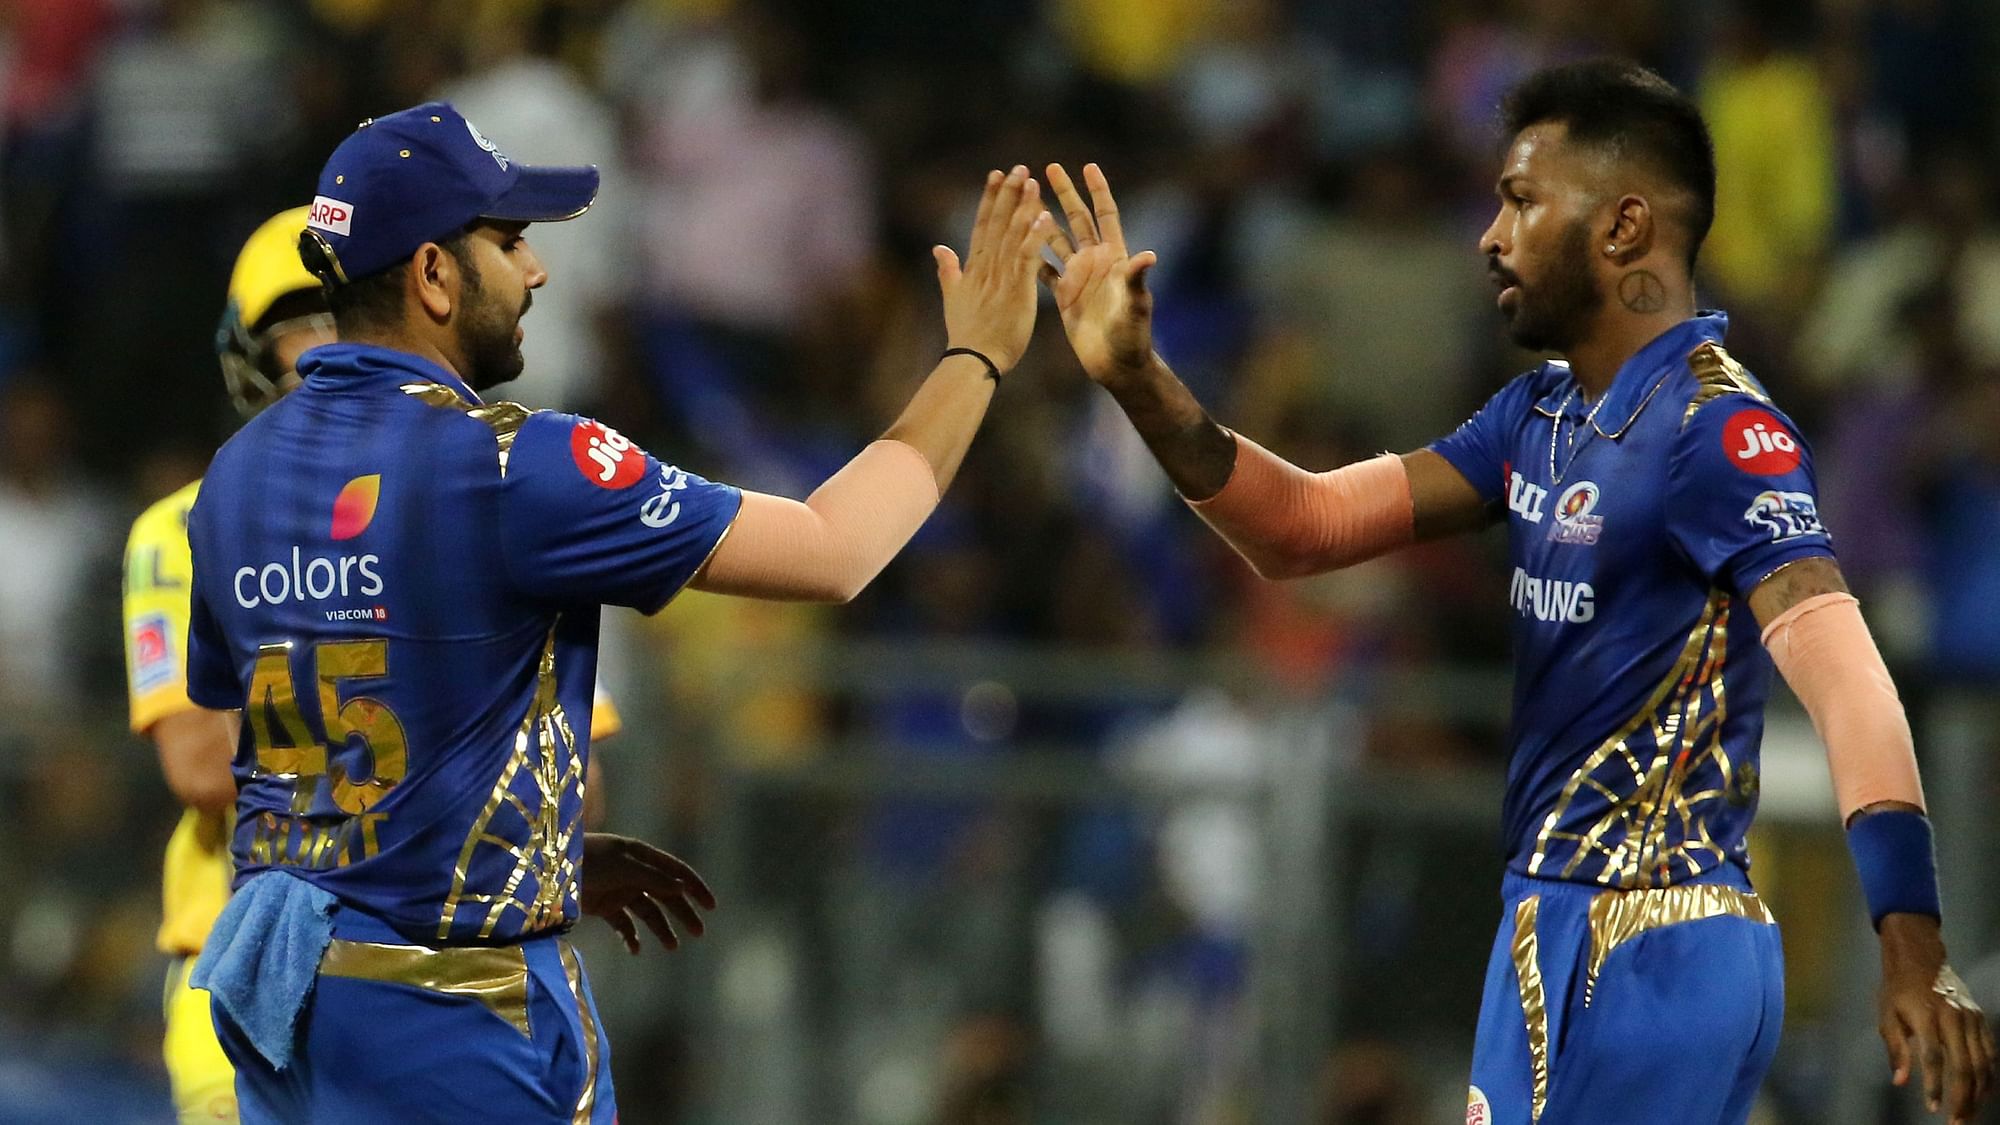 Besides scoring 402 runs with the bat, Hardik also picked up 14 wickets for Mumbai Indians in IPL 2019.&nbsp;